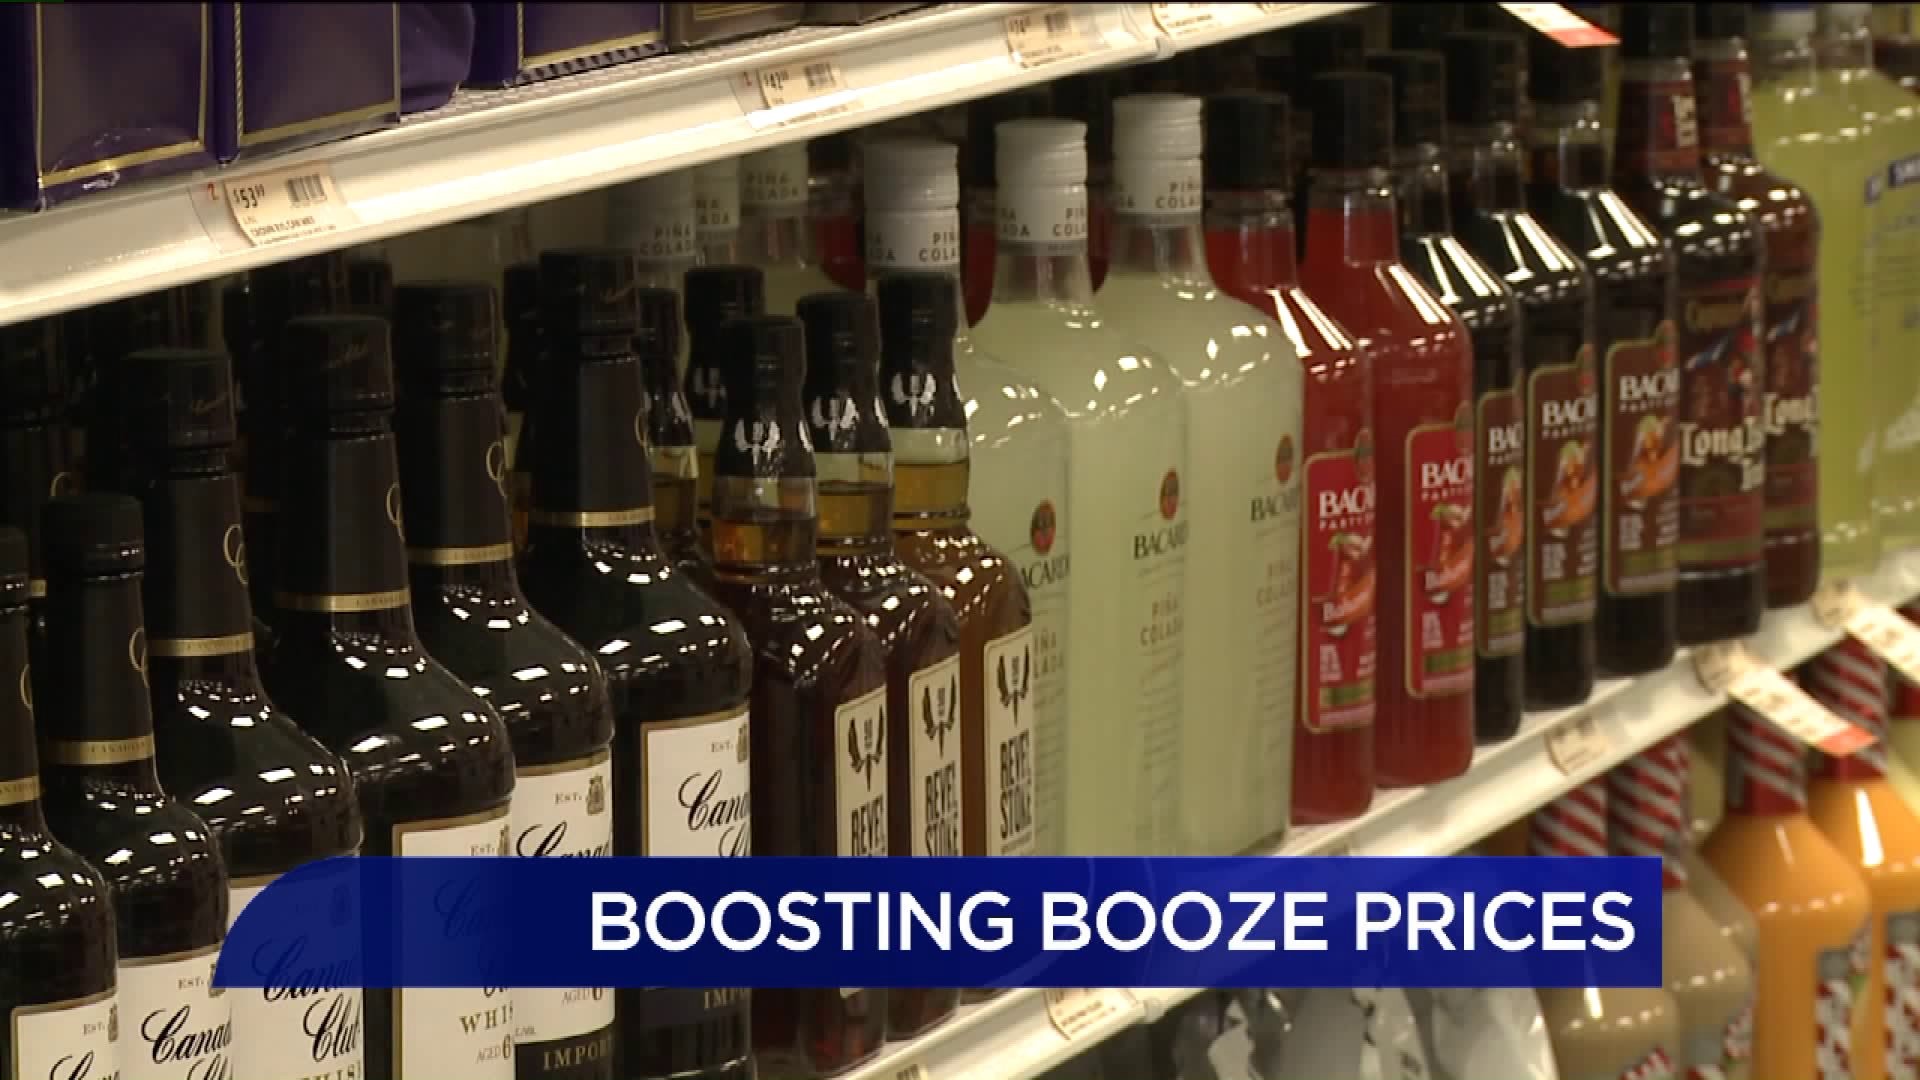 Boosting Booze Prices